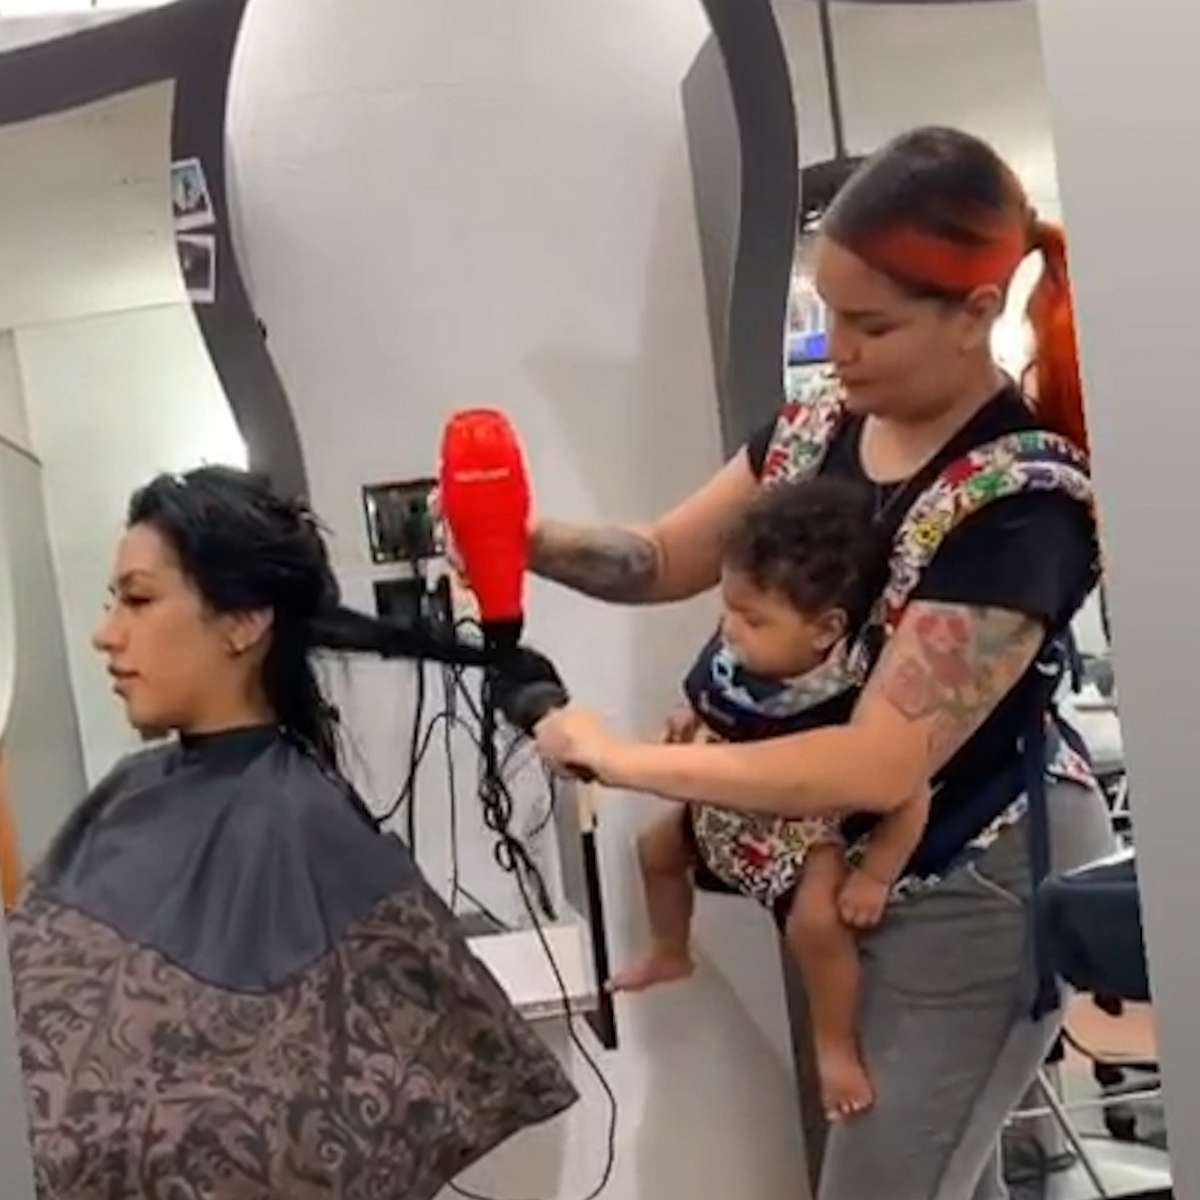 PHOTO: Maria Khachotamraz took care of her longtime friend Jessica at the salon on Sept. 25 while her 9-month-old daughter Camila was strapped to her chest.